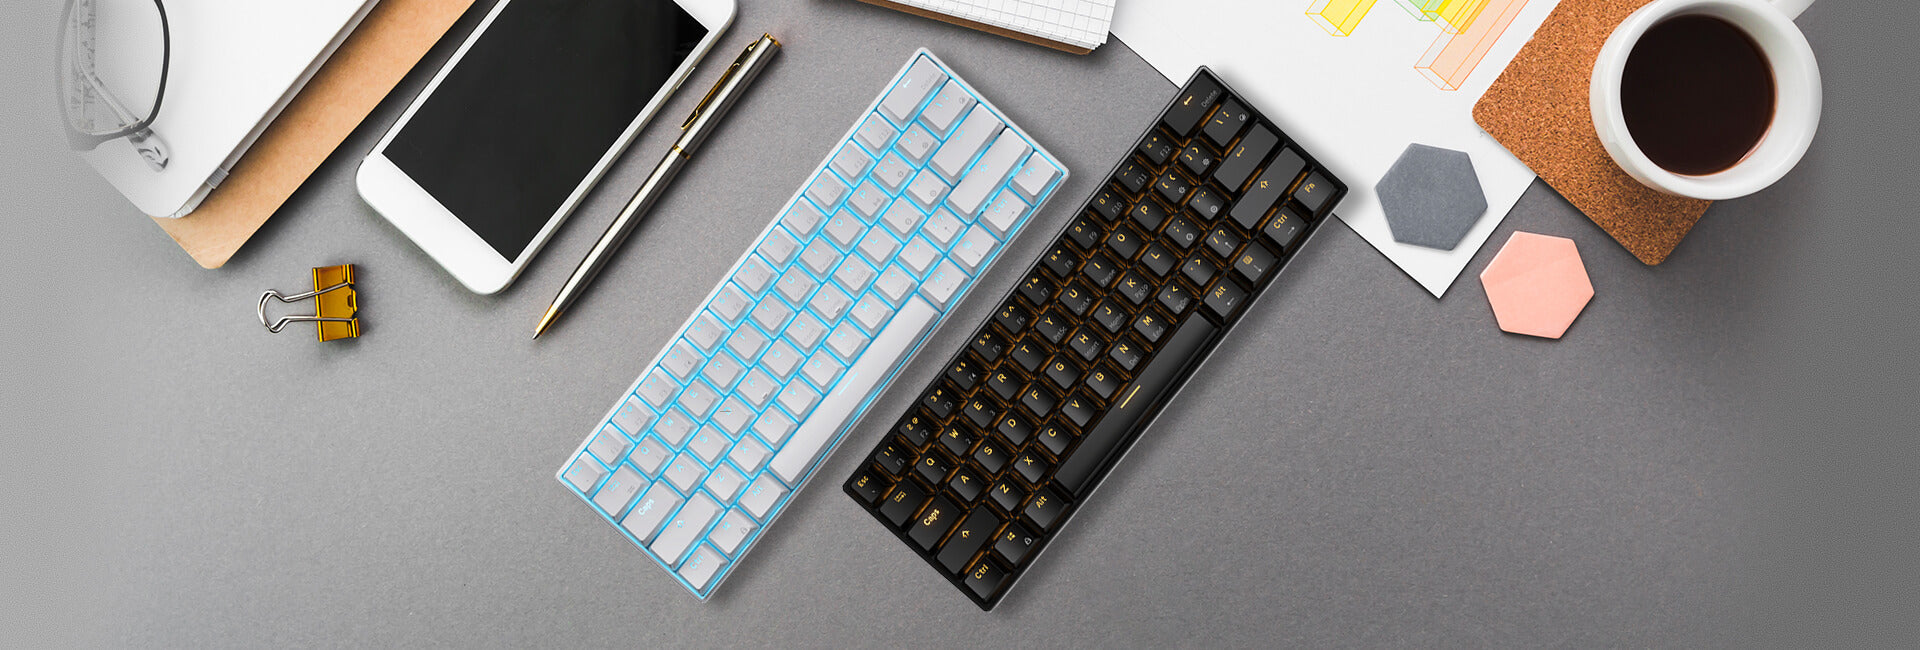 RK61 60 hot swappable keyboard Open-Box